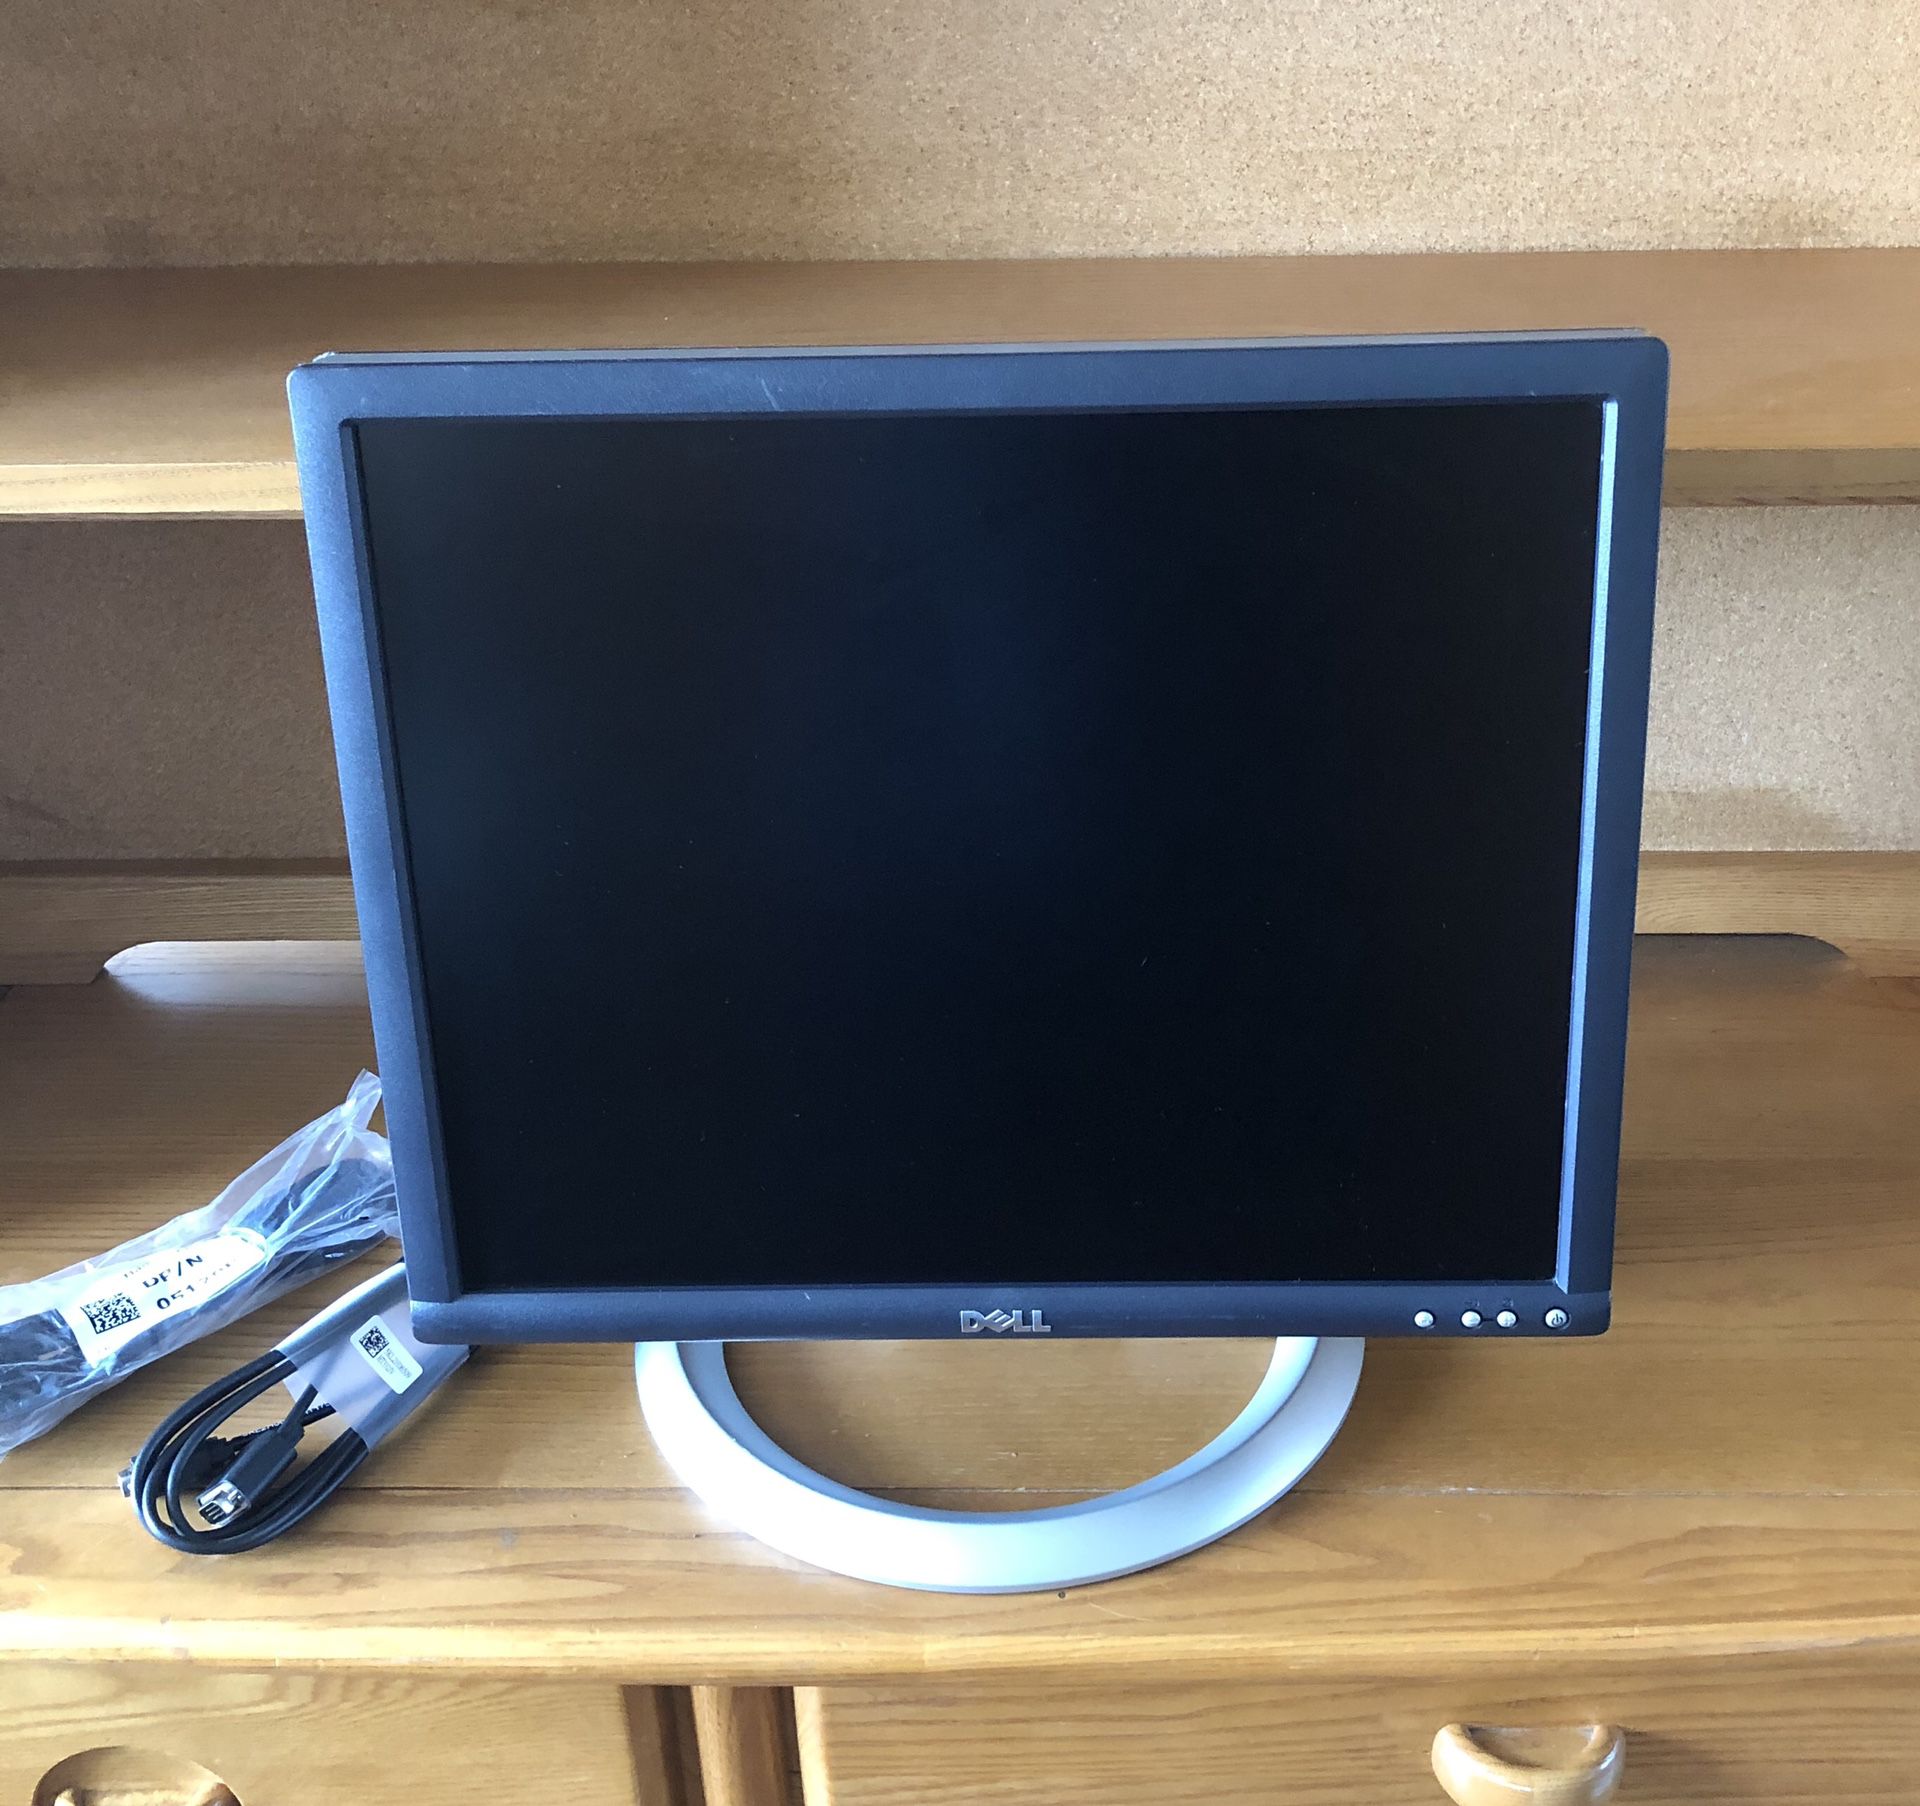 Dell 1905FP 19” UltraSharp LCD Monitor w/ Adjustable Telescopic Base and HDMI Cable